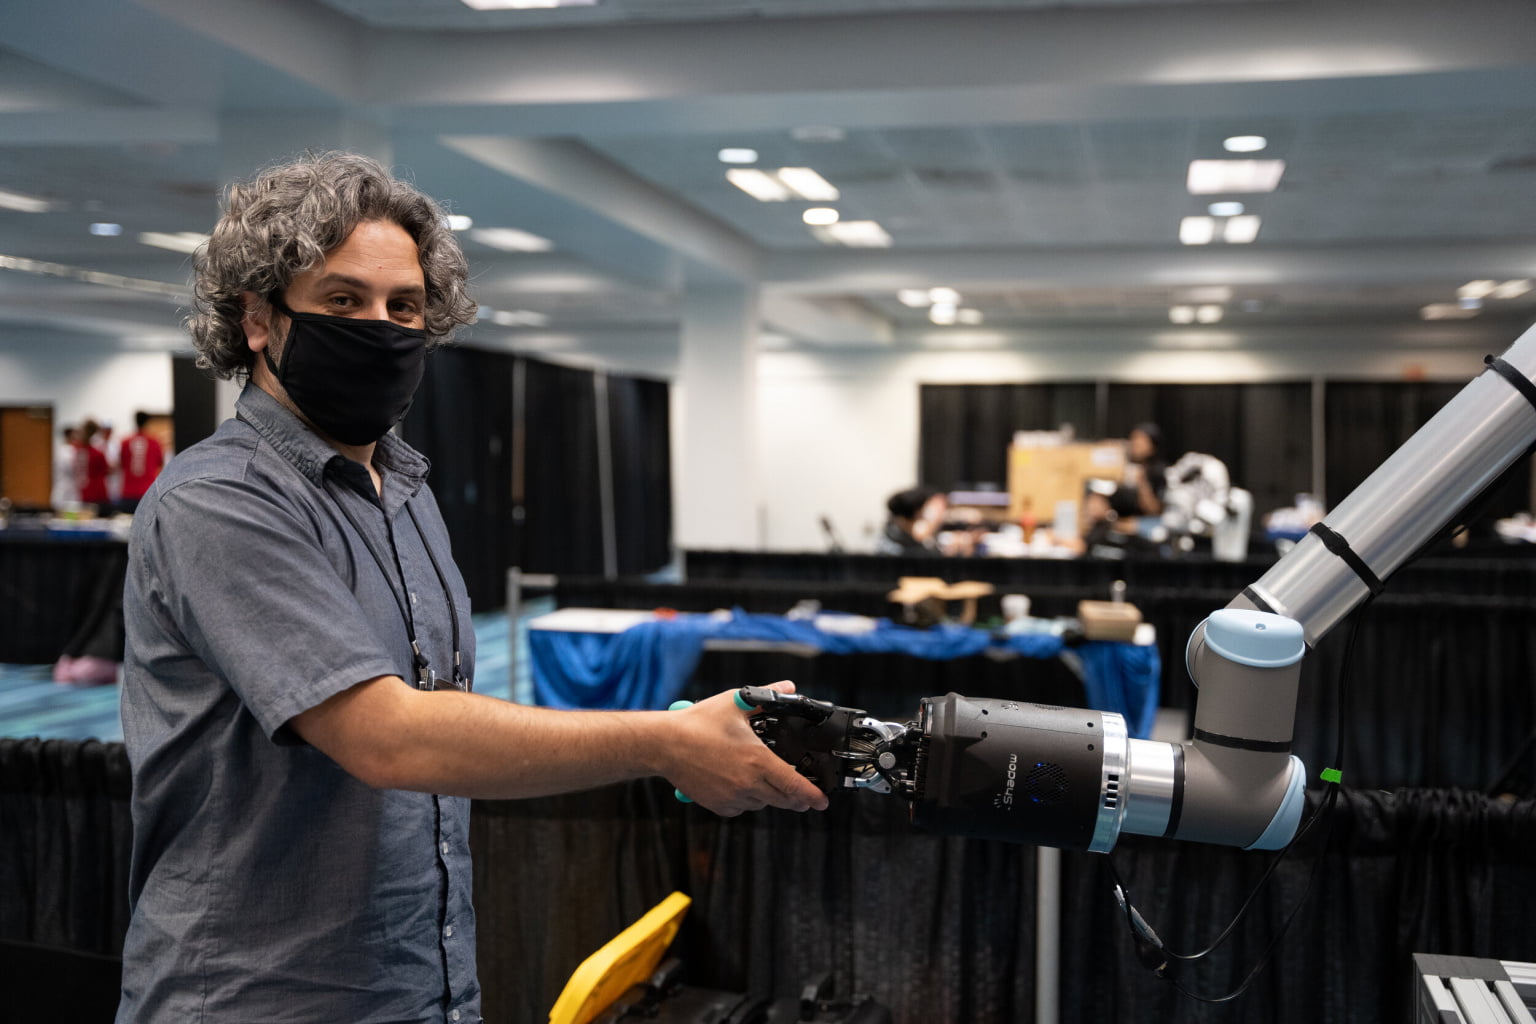 Press Release: Tactile Telerobot by Converge Reaches Finals of $10 Million ANA Avatar XPRIZE